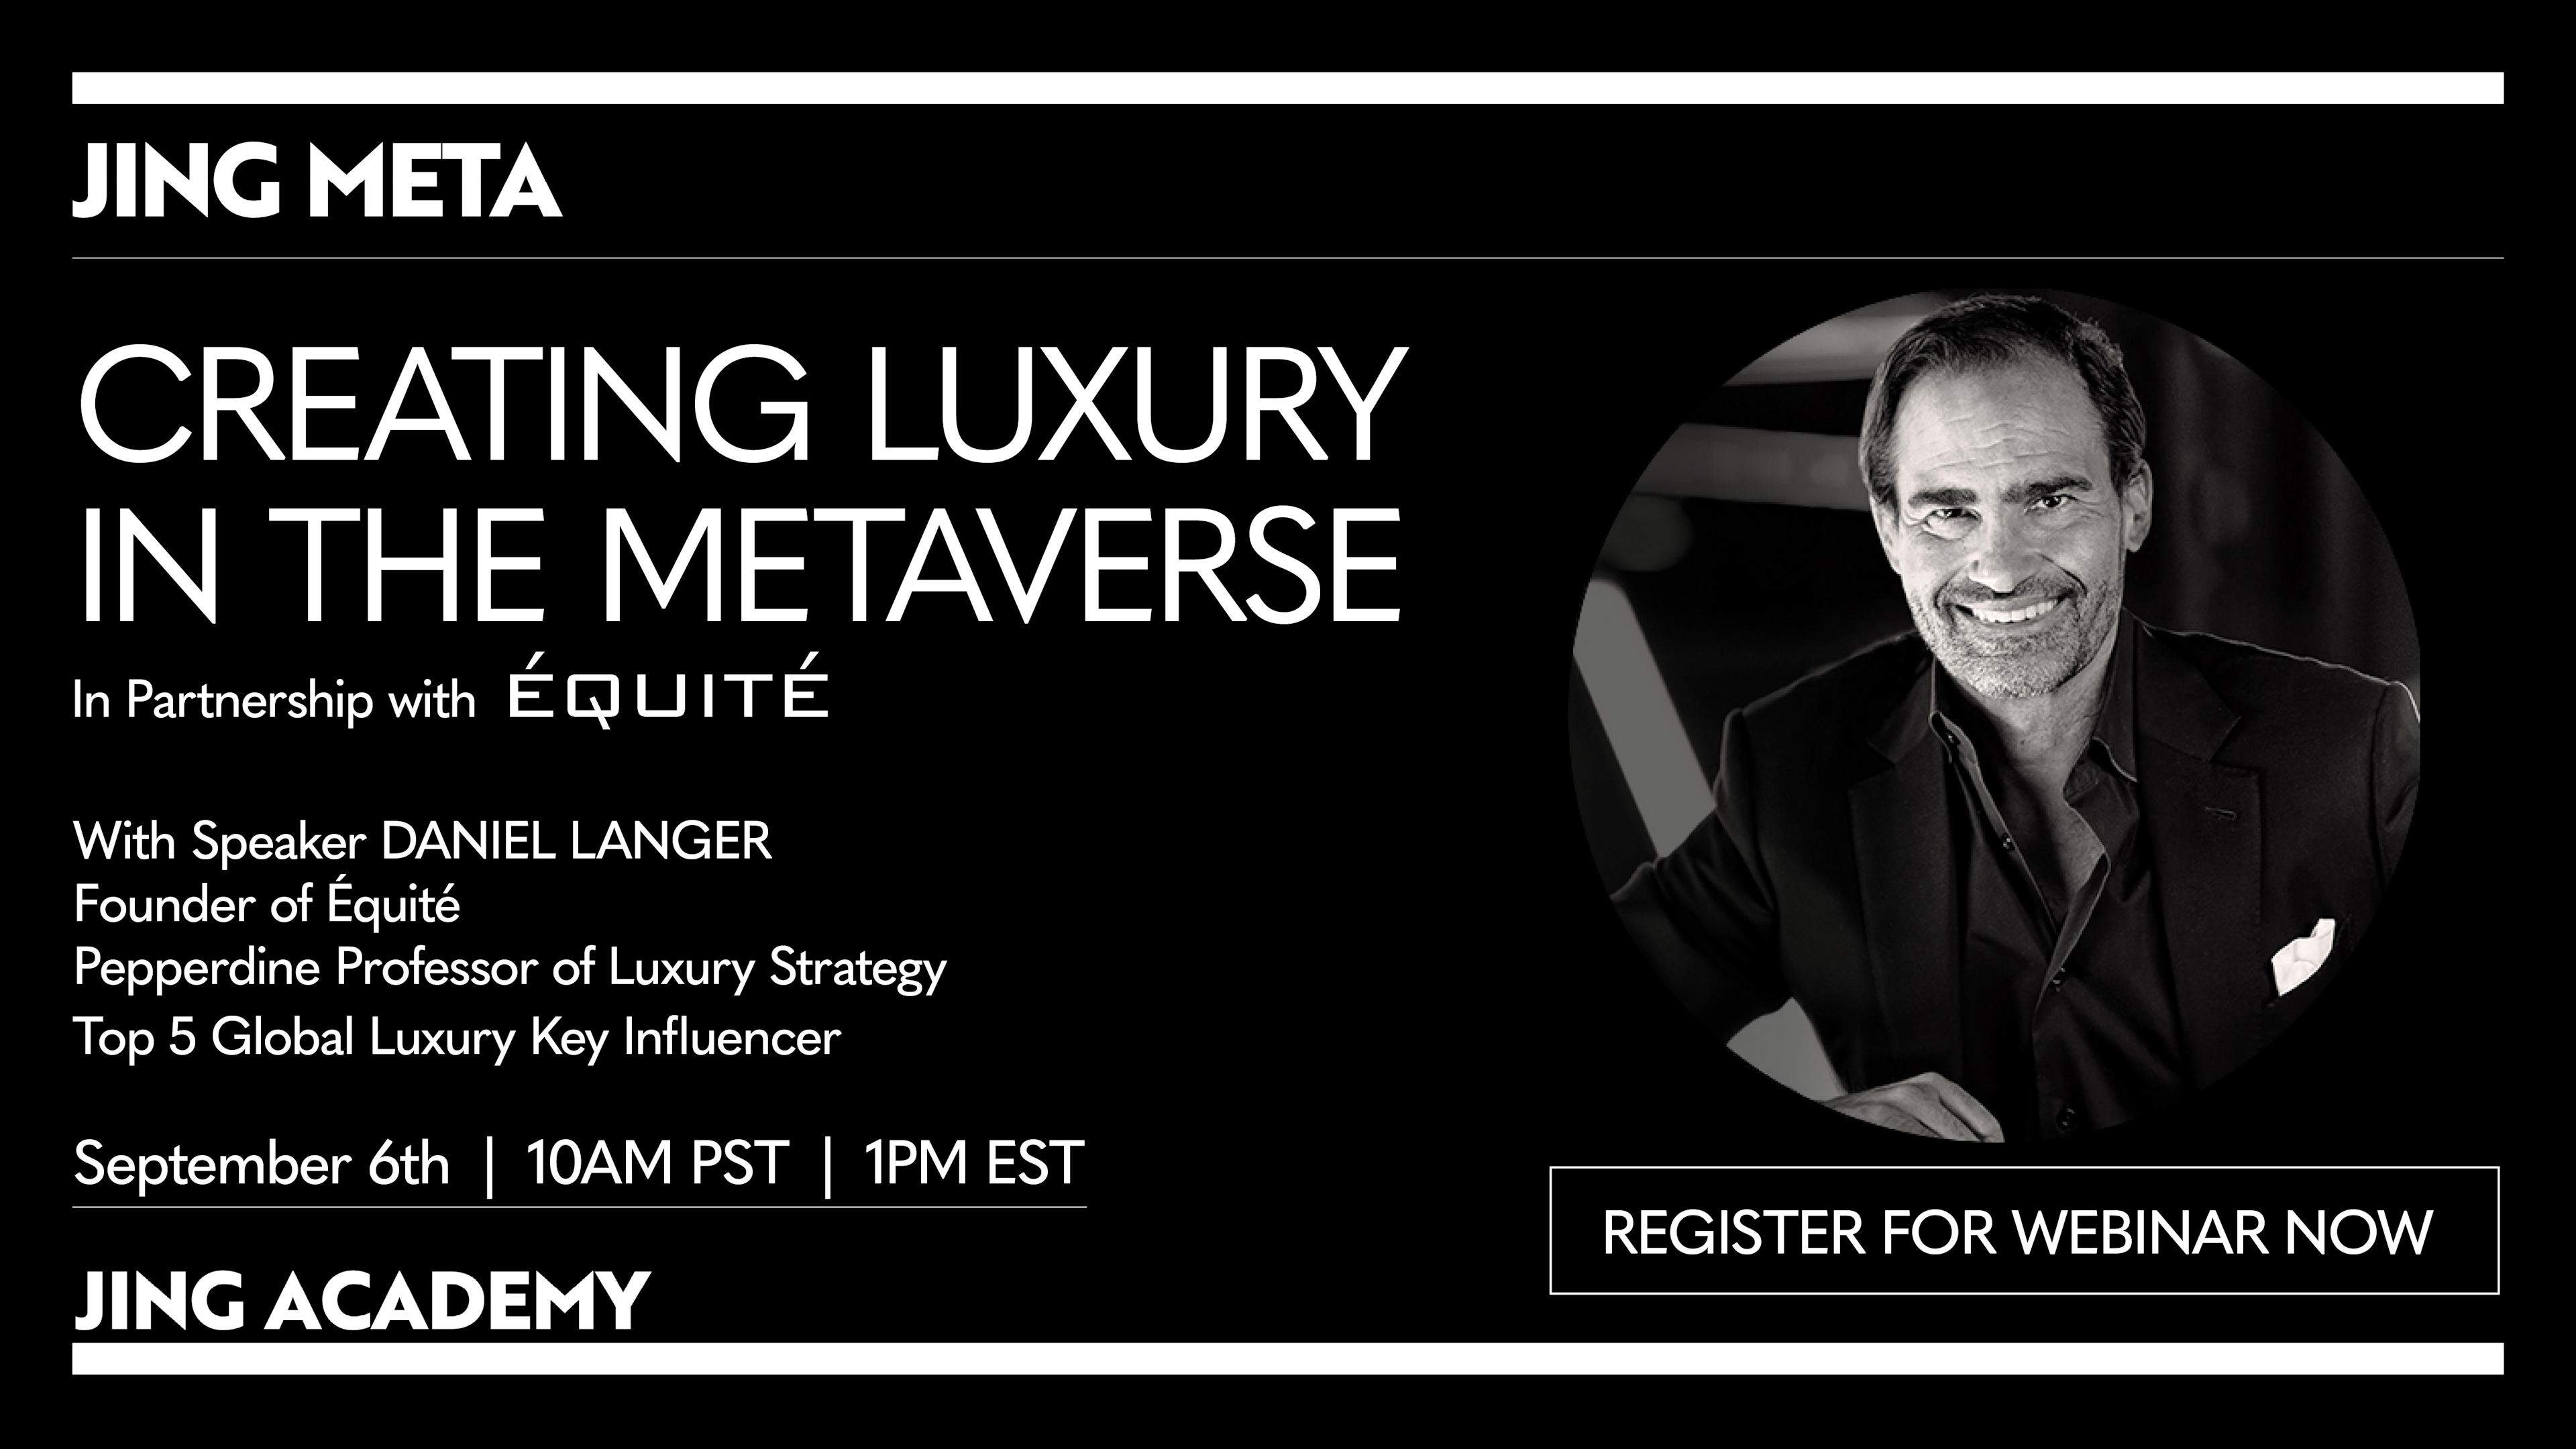 In an exclusive webinar series for Jing Daily readers, Daniel Langer offers the latest insights into managing luxury brands in the metaverse. 